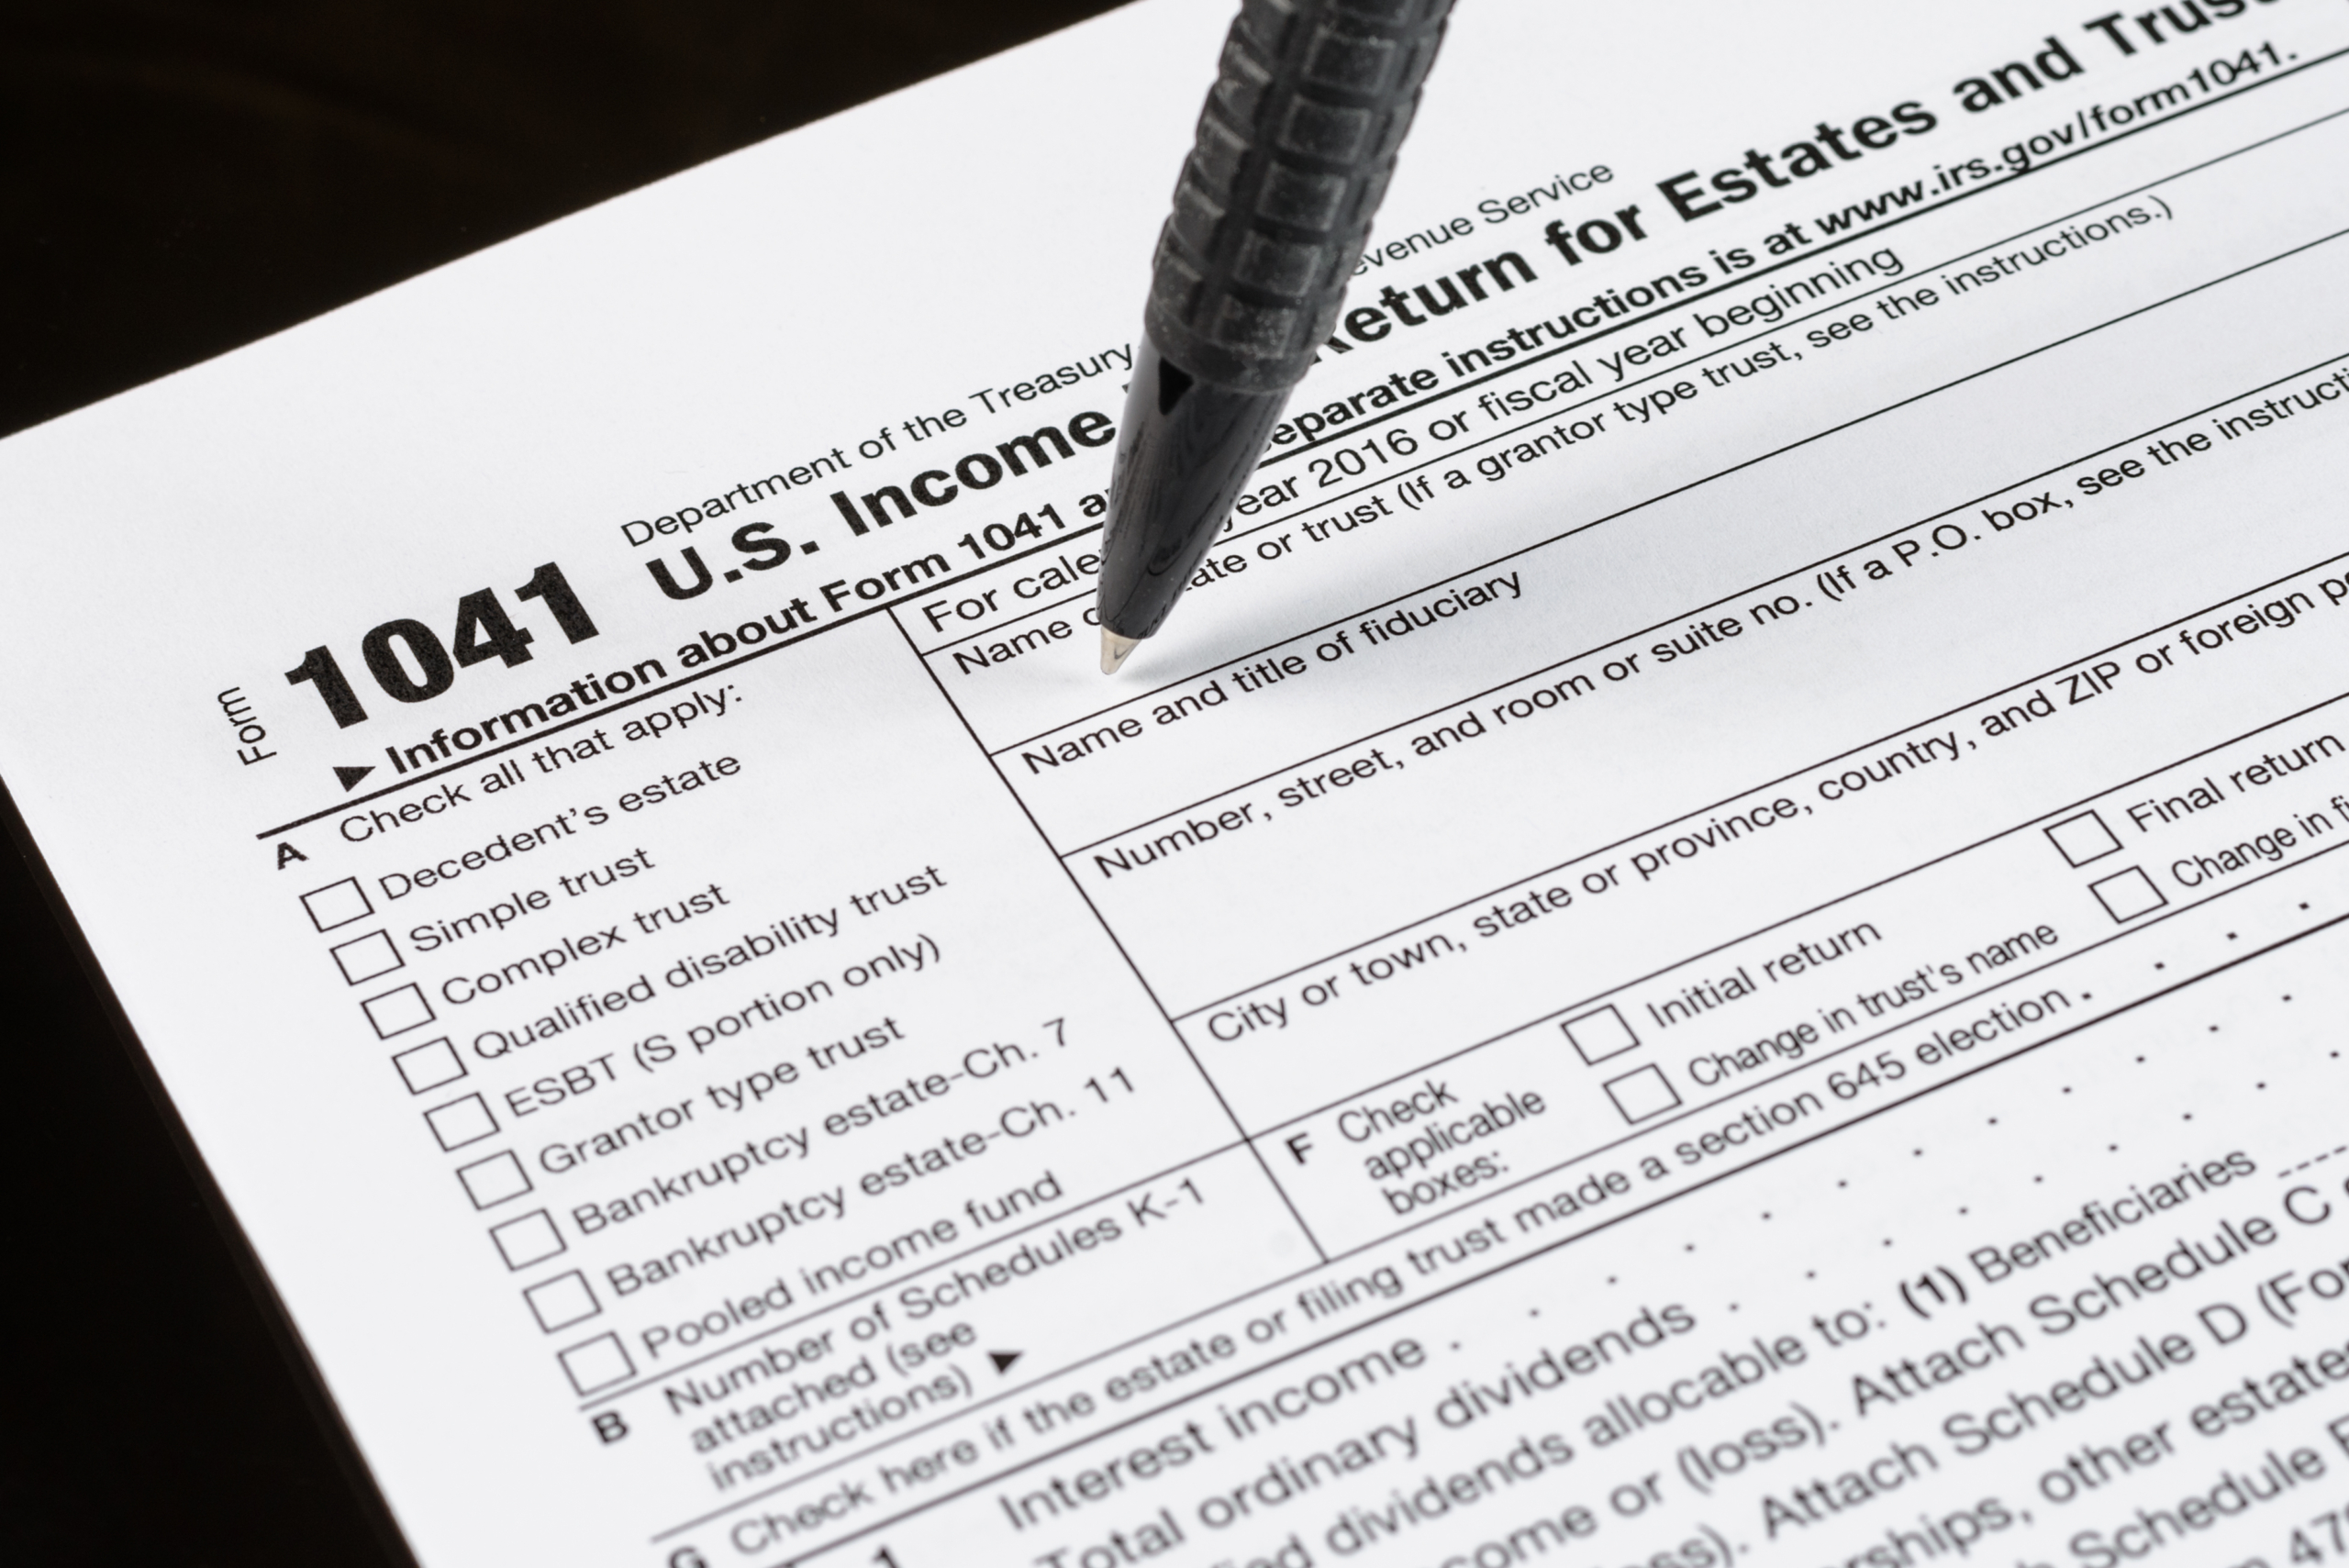 nj-state-tax-form-fill-out-and-sign-printable-pdf-template-signnow